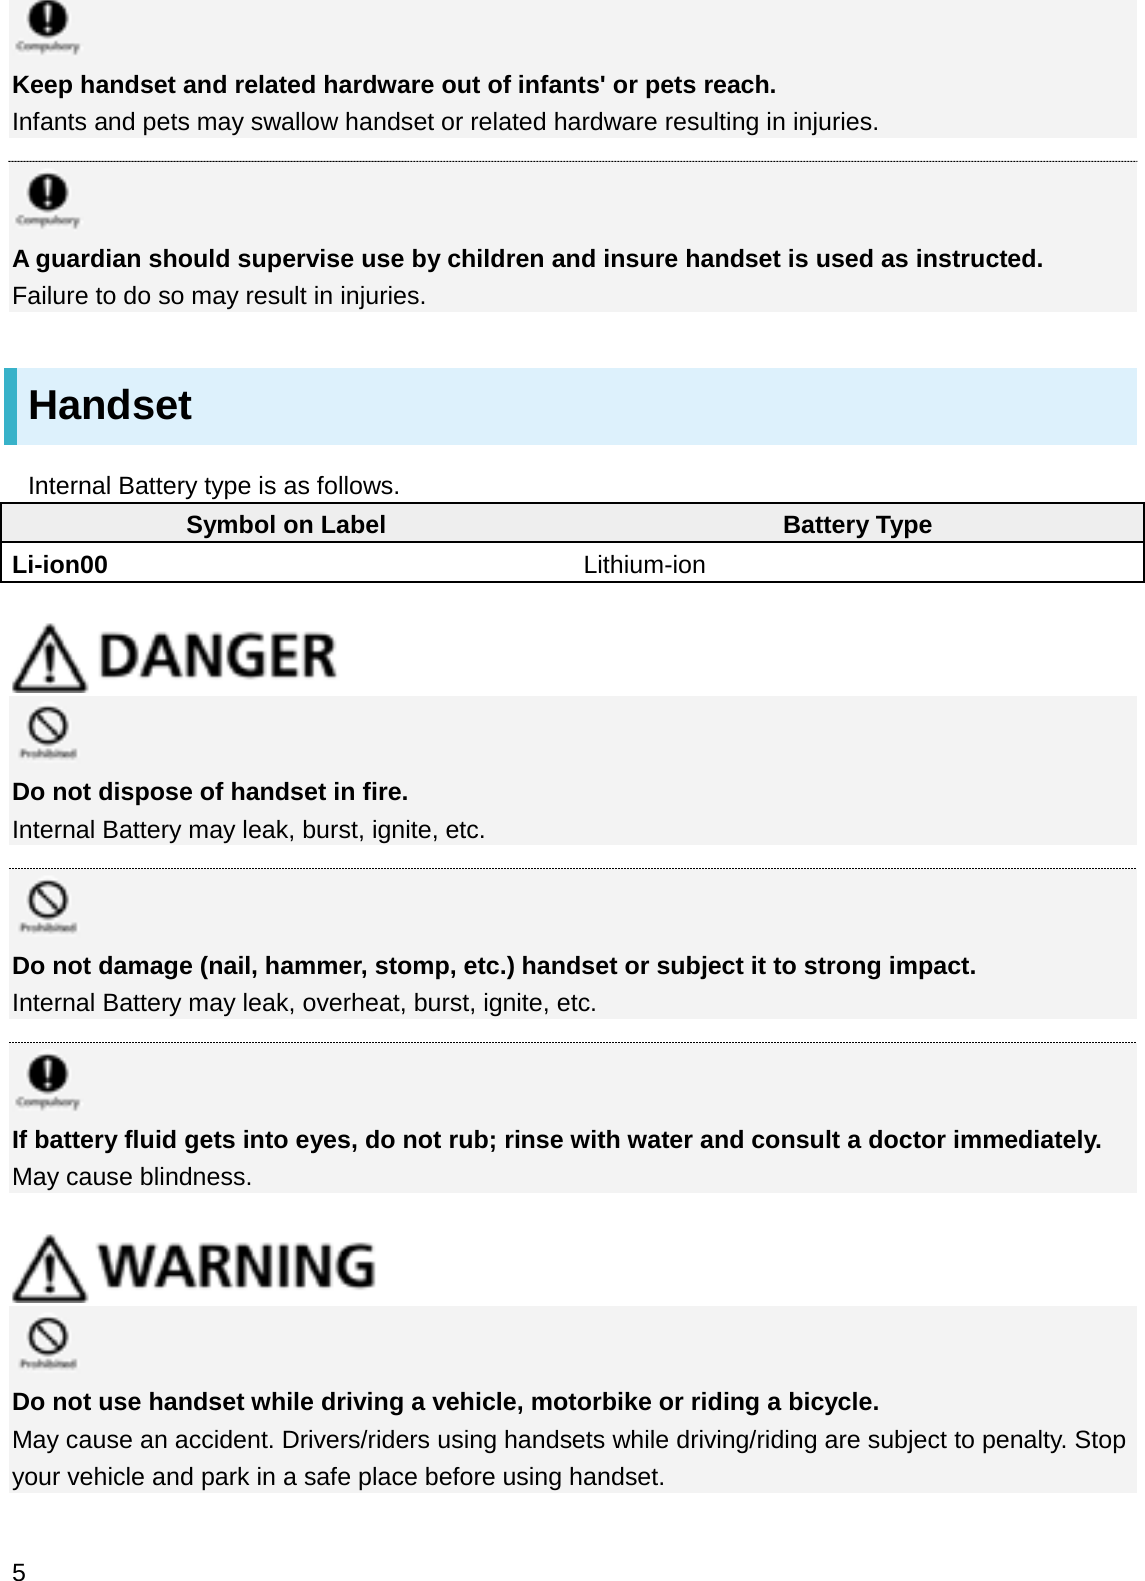 Keep handset and related hardware out of infants&apos; or pets reach.Infants and pets may swallow handset or related hardware resulting in injuries.A guardian should supervise use by children and insure handset is used as instructed.Failure to do so may result in injuries.HandsetInternal Battery type is as follows.Symbol on Label Battery TypeLi-ion00 Lithium-ionDo not dispose of handset in fire.Internal Battery may leak, burst, ignite, etc.Do not damage (nail, hammer, stomp, etc.) handset or subject it to strong impact.Internal Battery may leak, overheat, burst, ignite, etc.If battery fluid gets into eyes, do not rub; rinse with water and consult a doctor immediately.May cause blindness.Do not use handset while driving a vehicle, motorbike or riding a bicycle.May cause an accident. Drivers/riders using handsets while driving/riding are subject to penalty. Stop your vehicle and park in a safe place before using handset.5